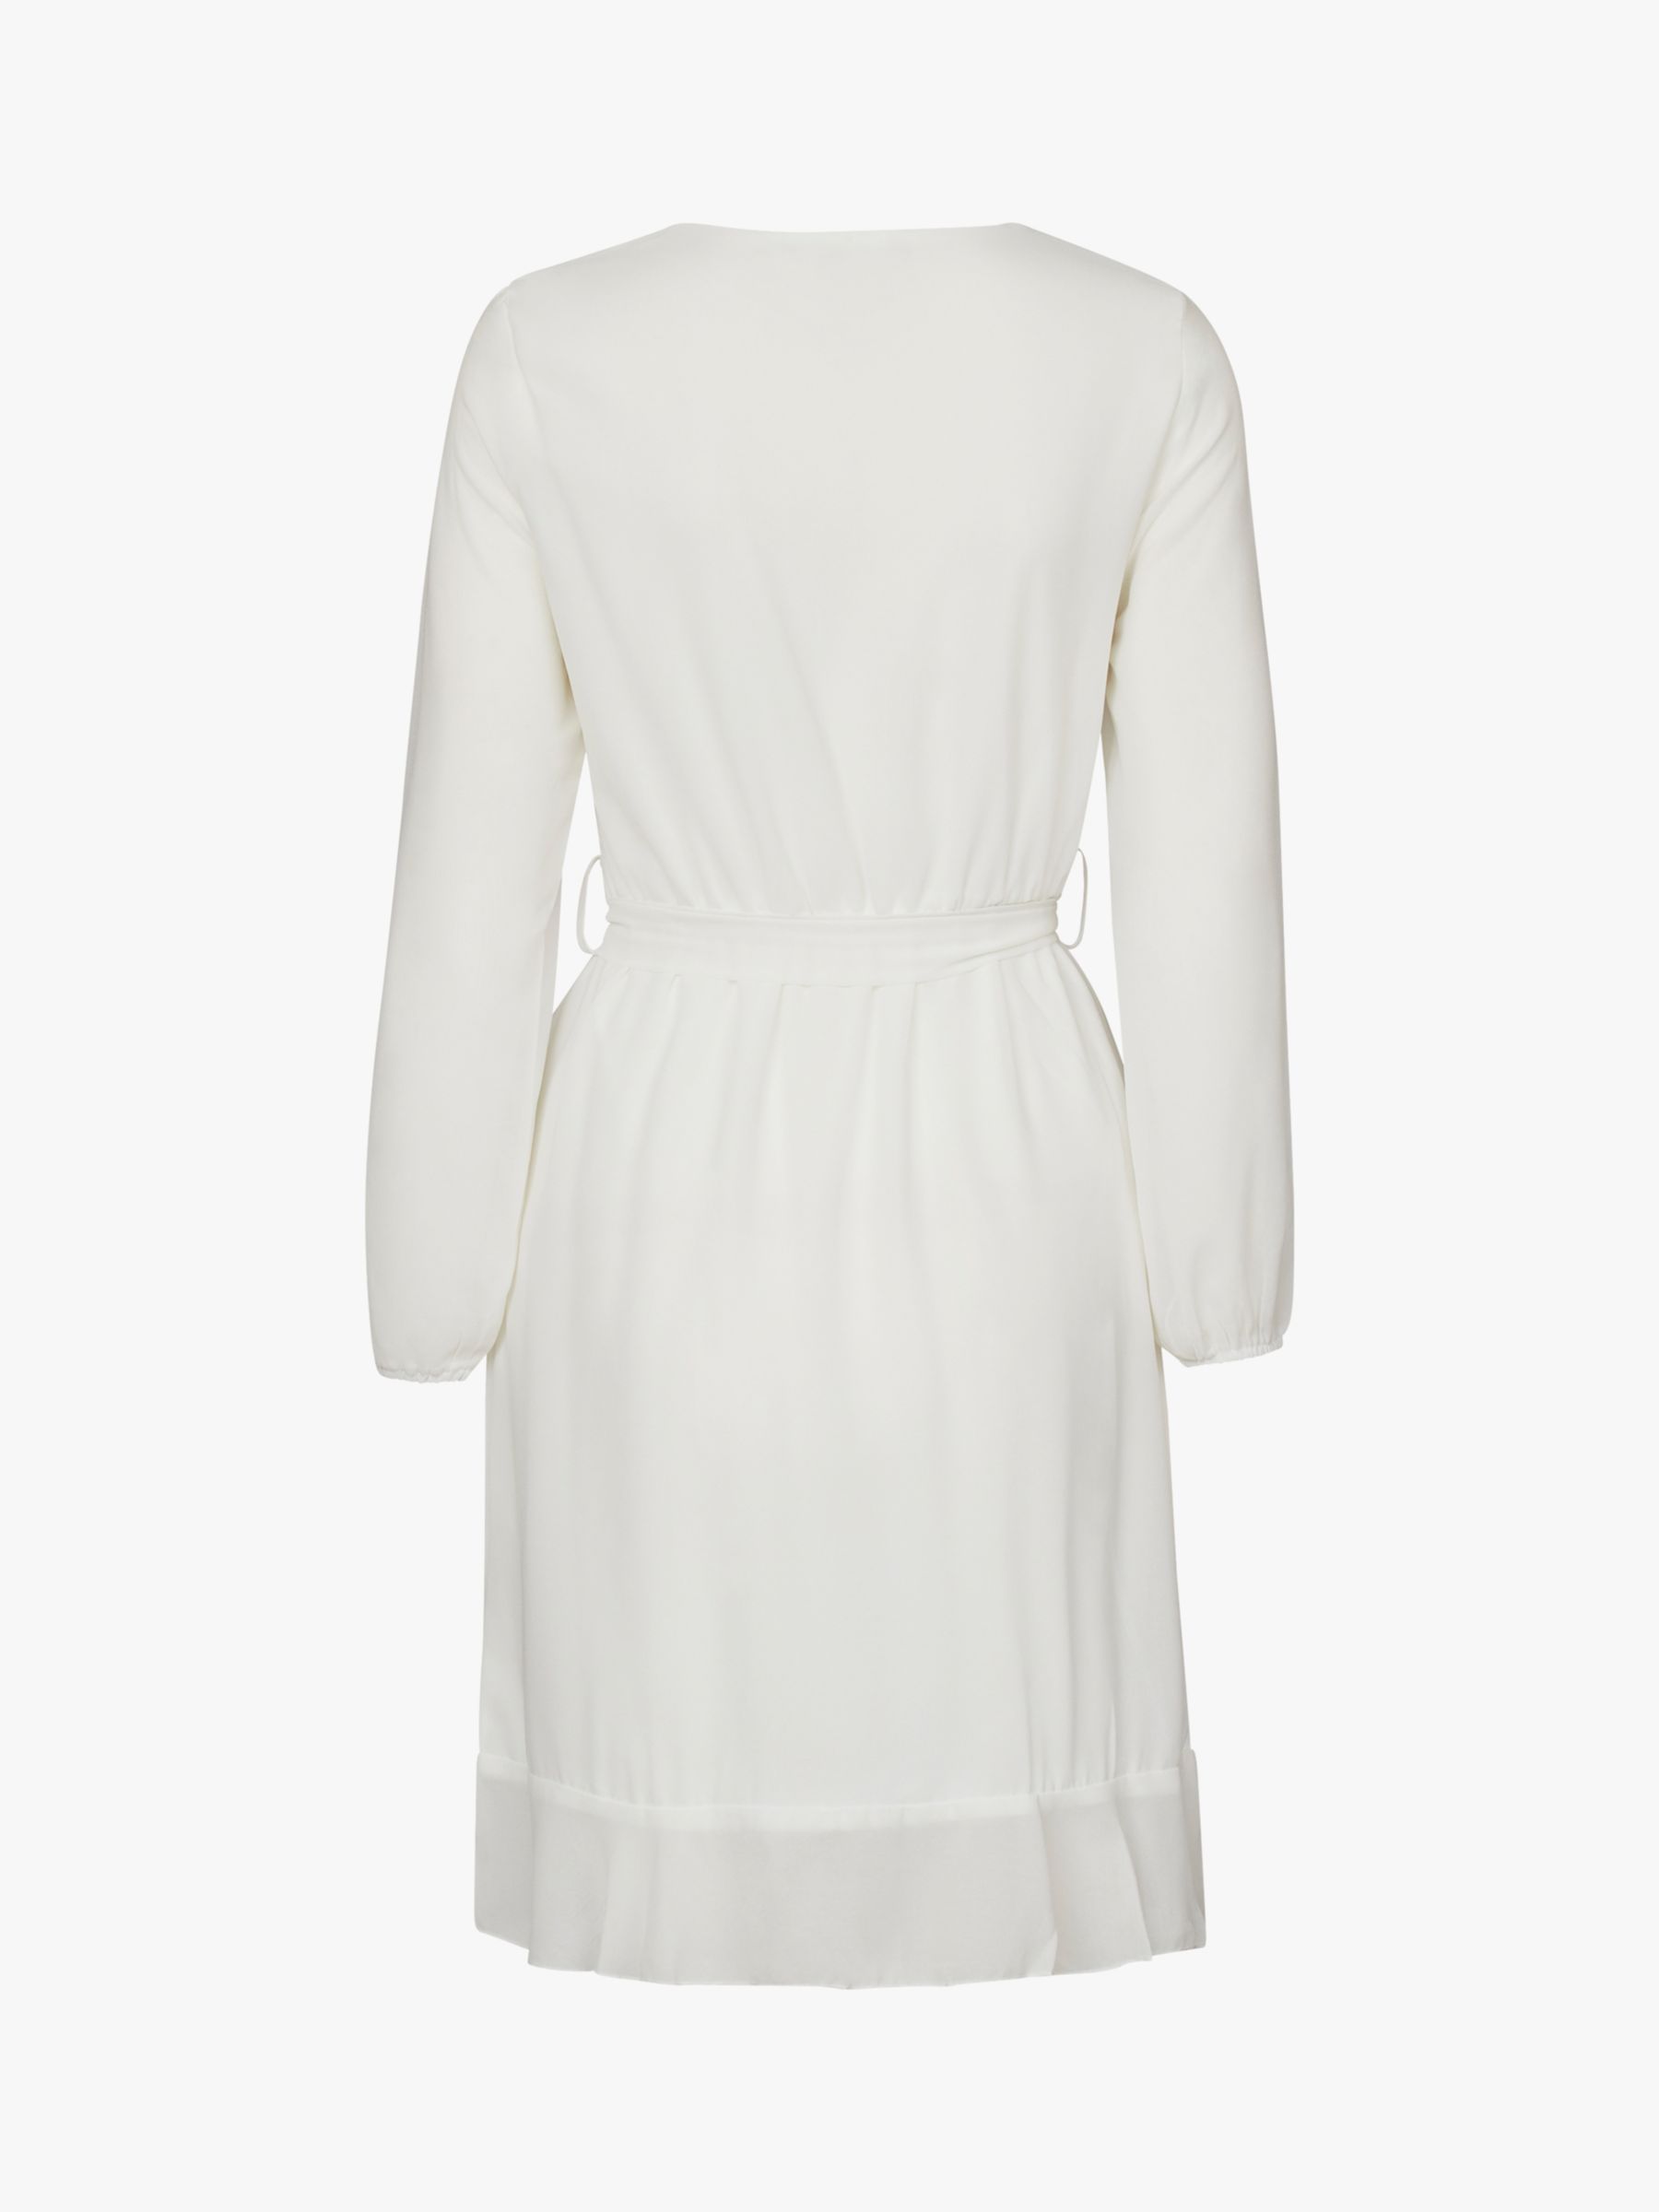 Buy Sisters Point New Greto Wrap Dress Online at johnlewis.com